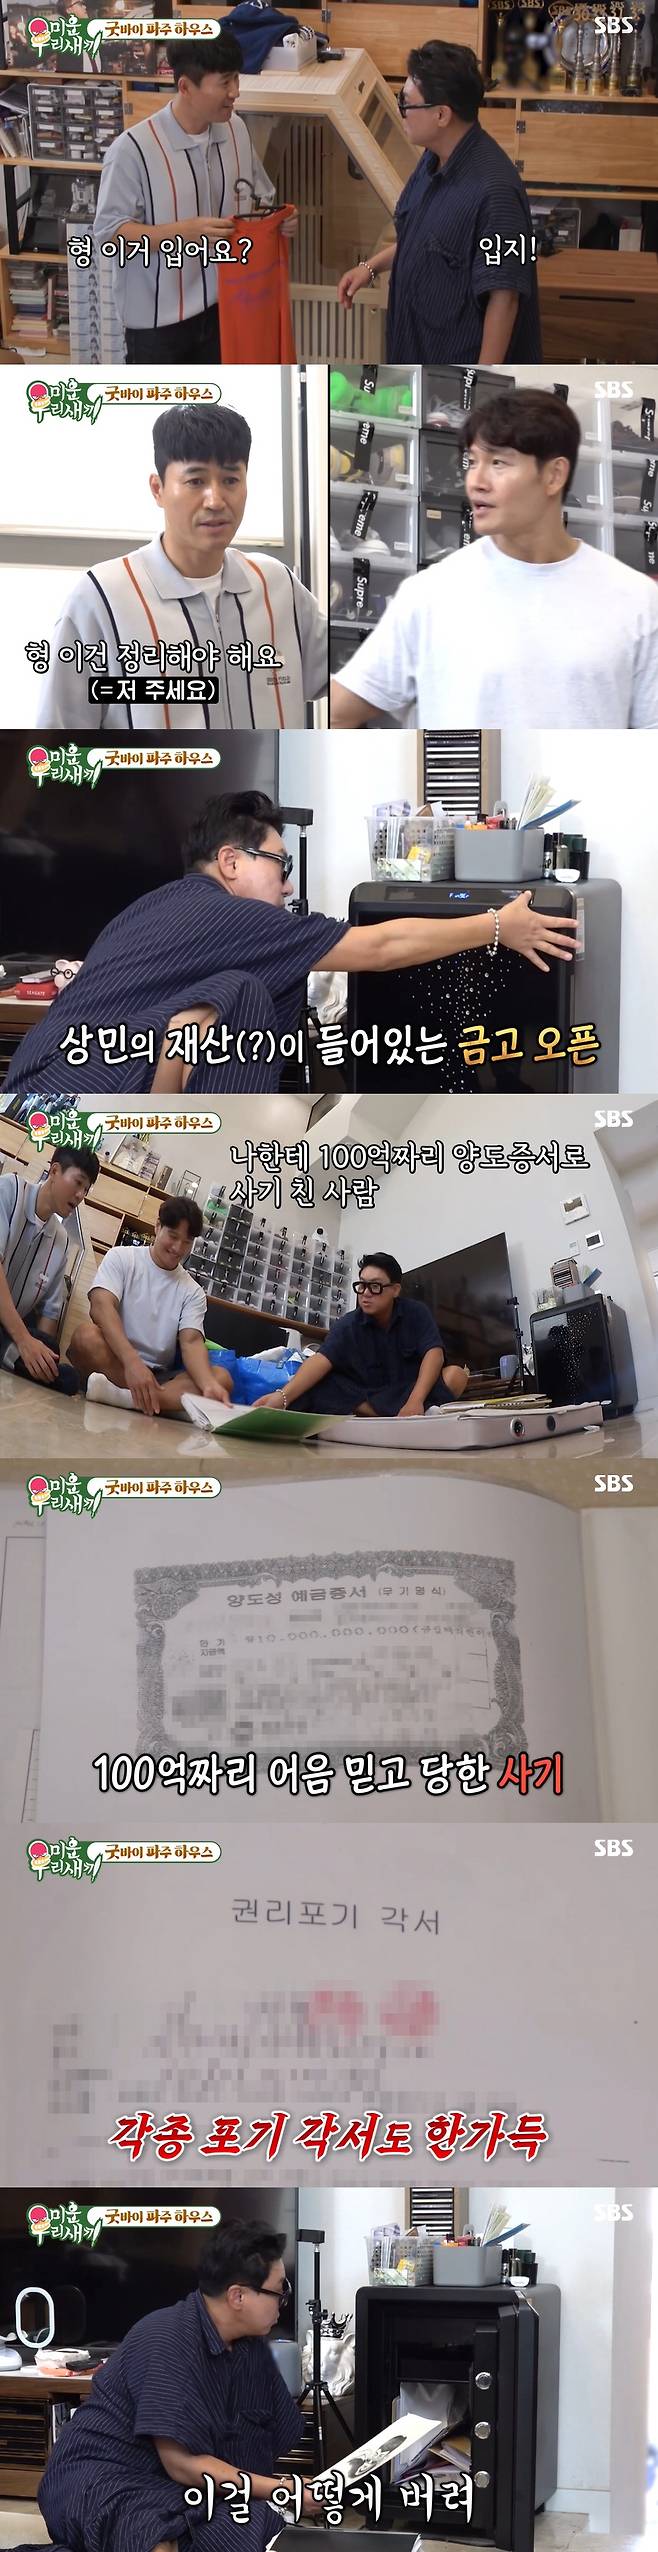 Lee Sang-min has announced that he will leave the Paju two-story house in a year and a half and move to Yongsan District.On SBS My Little Old Boy broadcasted on the 2nd, Lee Sang-min, who was about to move, was portrayed.Lee Sang-min, who moved to a two-story house in Paju with a deposit of 50 million won and a monthly rent of 2 million won in February last year, said, I live here and I like Seoul again.If you live alone, loneliness will double, he said. I plan to move to Yongsan District.Lee Sang-min invited Kim Jong-kook and Kim Jong-min before moving out to enjoy home camping together and make last memories at Paju house.Kim Jong-kook told Lee Sang-min, who is about to clear 6.9 billion won in debt, You need to practice meeting people. You can pay off your debts this year and go to a new house and start a new life.Lee Sang-min, who fed Kim Jong-kook and Kim Jong-min meat, said, Just help me organize my luggage. Im done, but I have some heavy things. Think of it as exercising.The two men who entered the house in a hurry were stunned to see Lee Sang-mins shoes filled to the ceiling height.Lee Sang-min said, Im going to leave my sneakers to a shoe company, and Kim Jong-min said, Its better to clean them up. You should empty them (not store them).However, Lee Sang-min pampered his shoes, saying, If you move to a big house later, you will make them a room.In addition, Lee Sang-min showed that he could not throw away a huge amount of clothes accumulated in the clothes room. Kim Jong-min laughed at the things that he had to clean up rather than concentrate on moving.Meanwhile, Kim Jong-kook wondered, Open Safe once and see whats in it. Lee Sang-min said, This is my property.Lee Sang-min, who looks at 10 billion transfer certificates and various abandonment notes with a bitter look, Kim Jong-kook asked, Do not you have to throw away all these documents when you move to a new house?However, Lee Sang-min said, I am not staying in the past, but I did not throw anything away and packed everything and made a load and laughed.